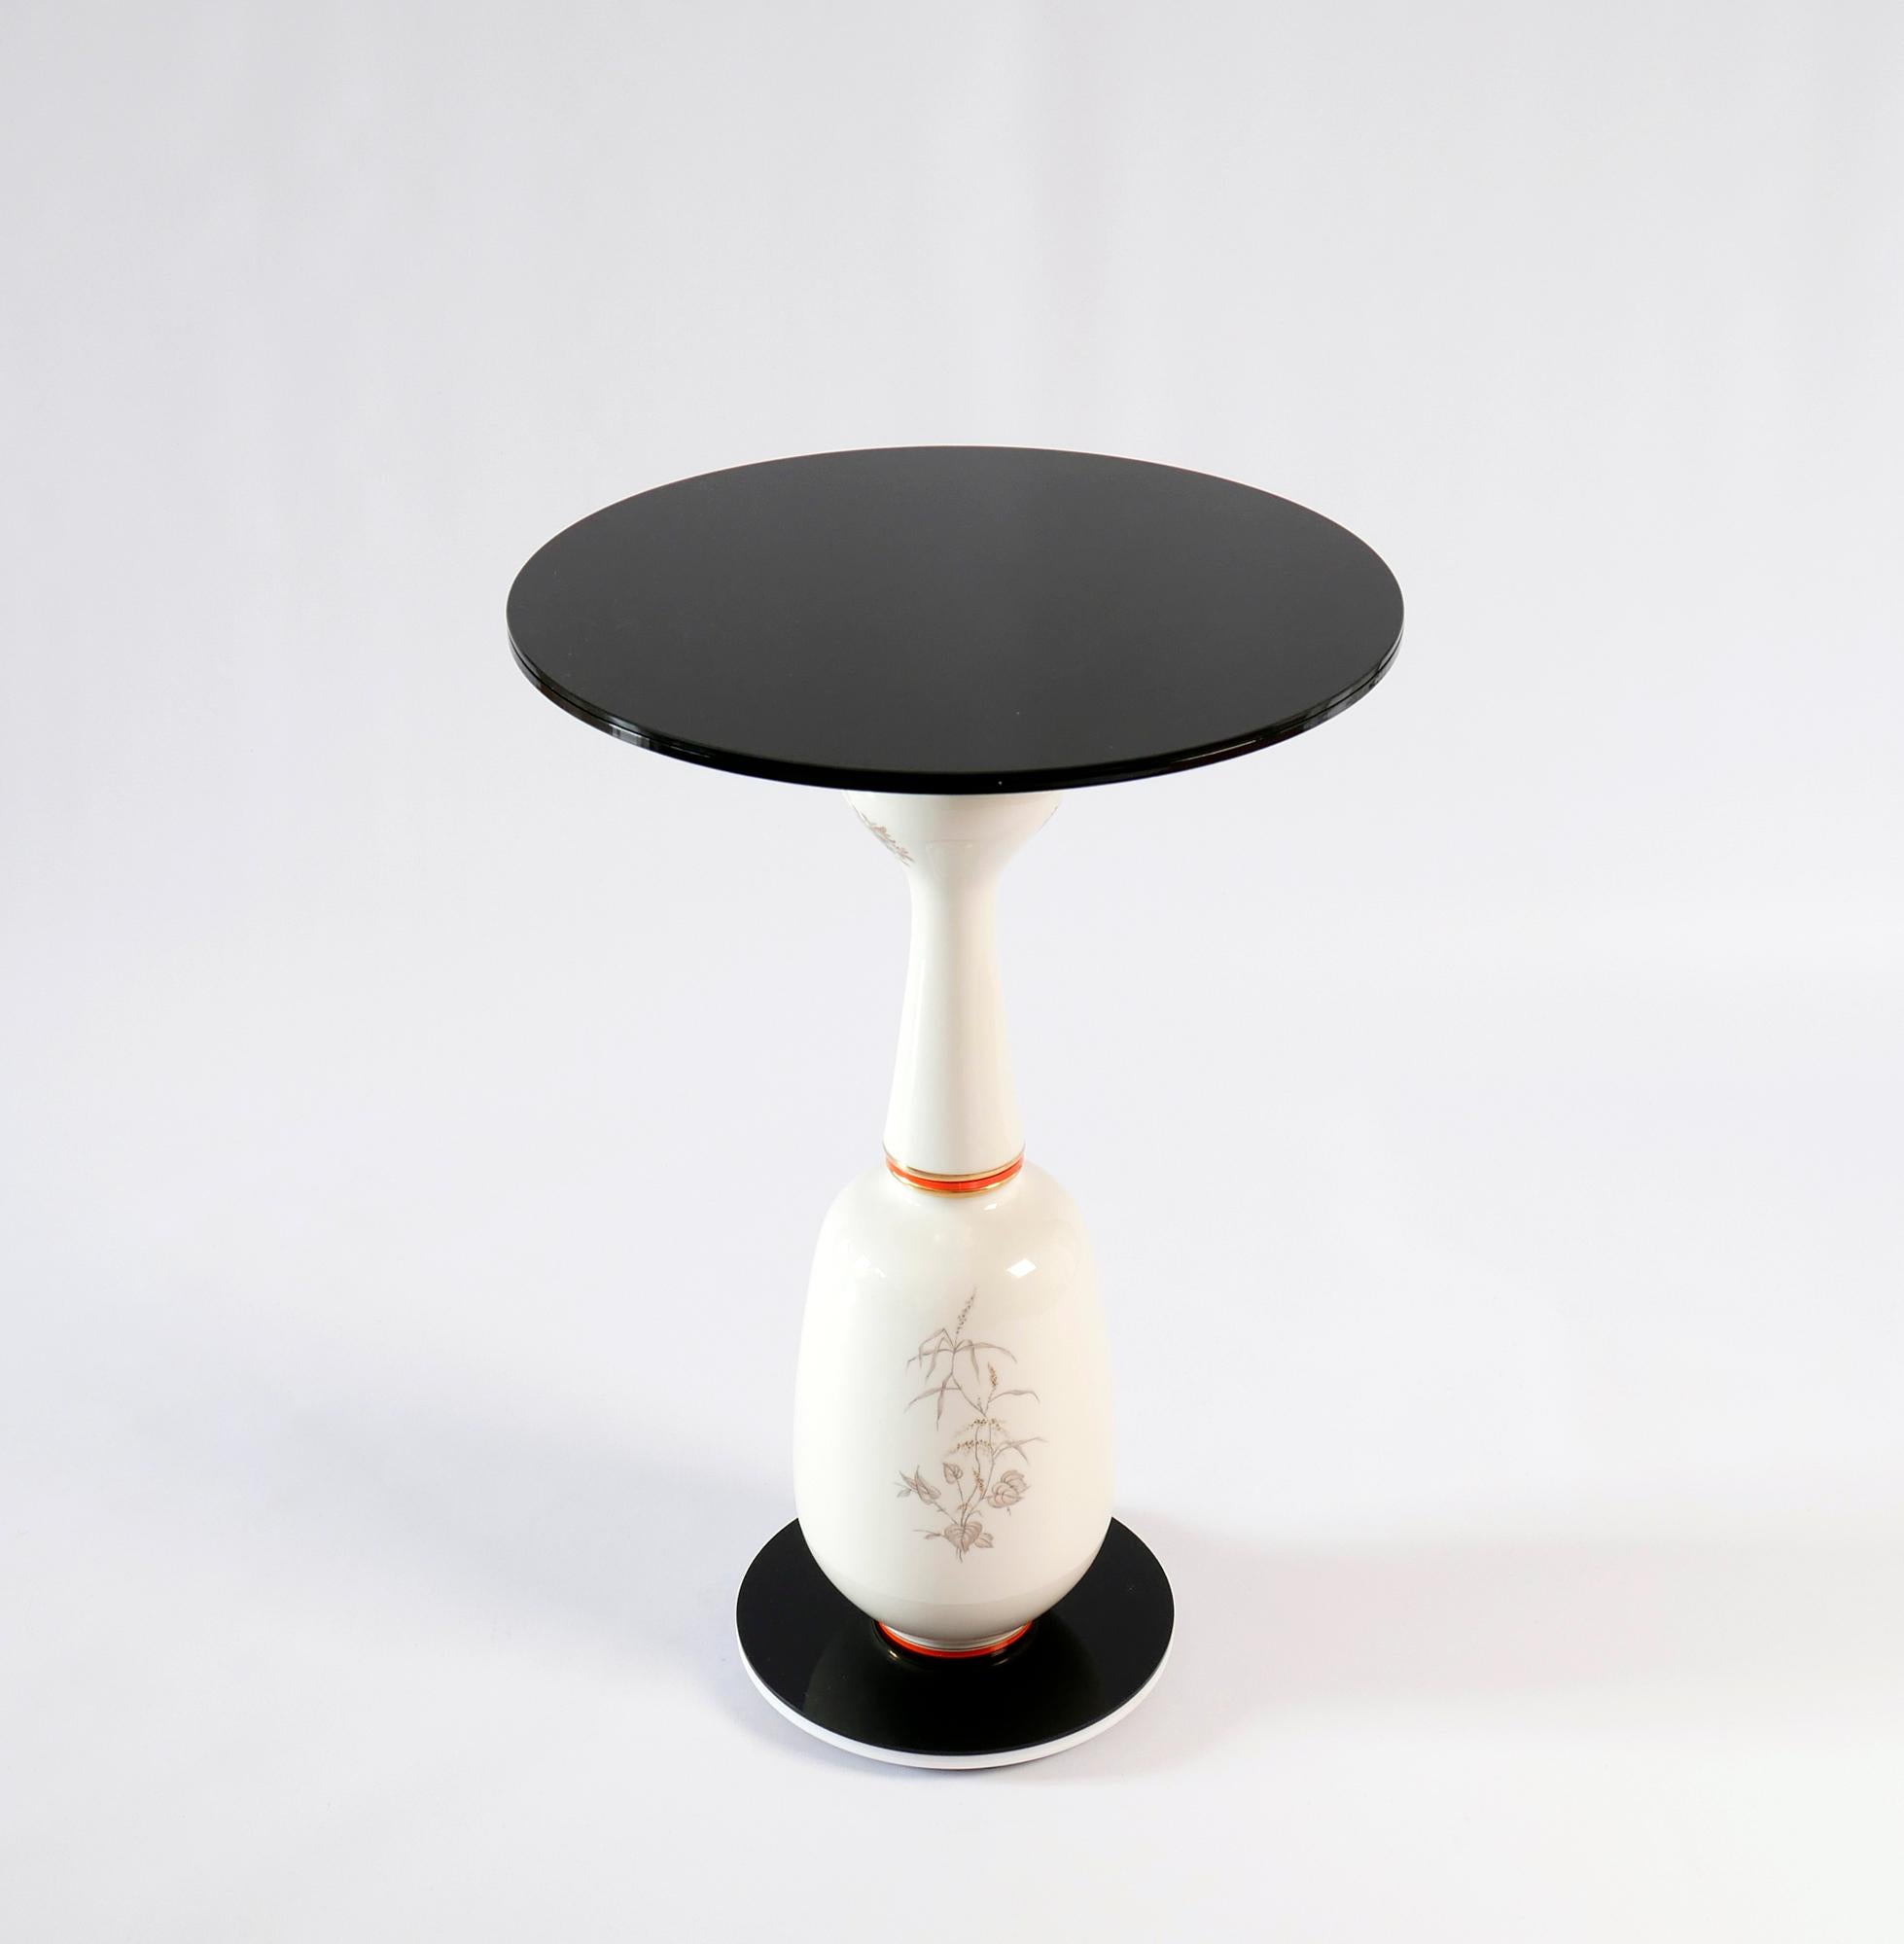 German 'Conversation Piece' Side Table, Vintage Ceramics and Glass, One Off Piece